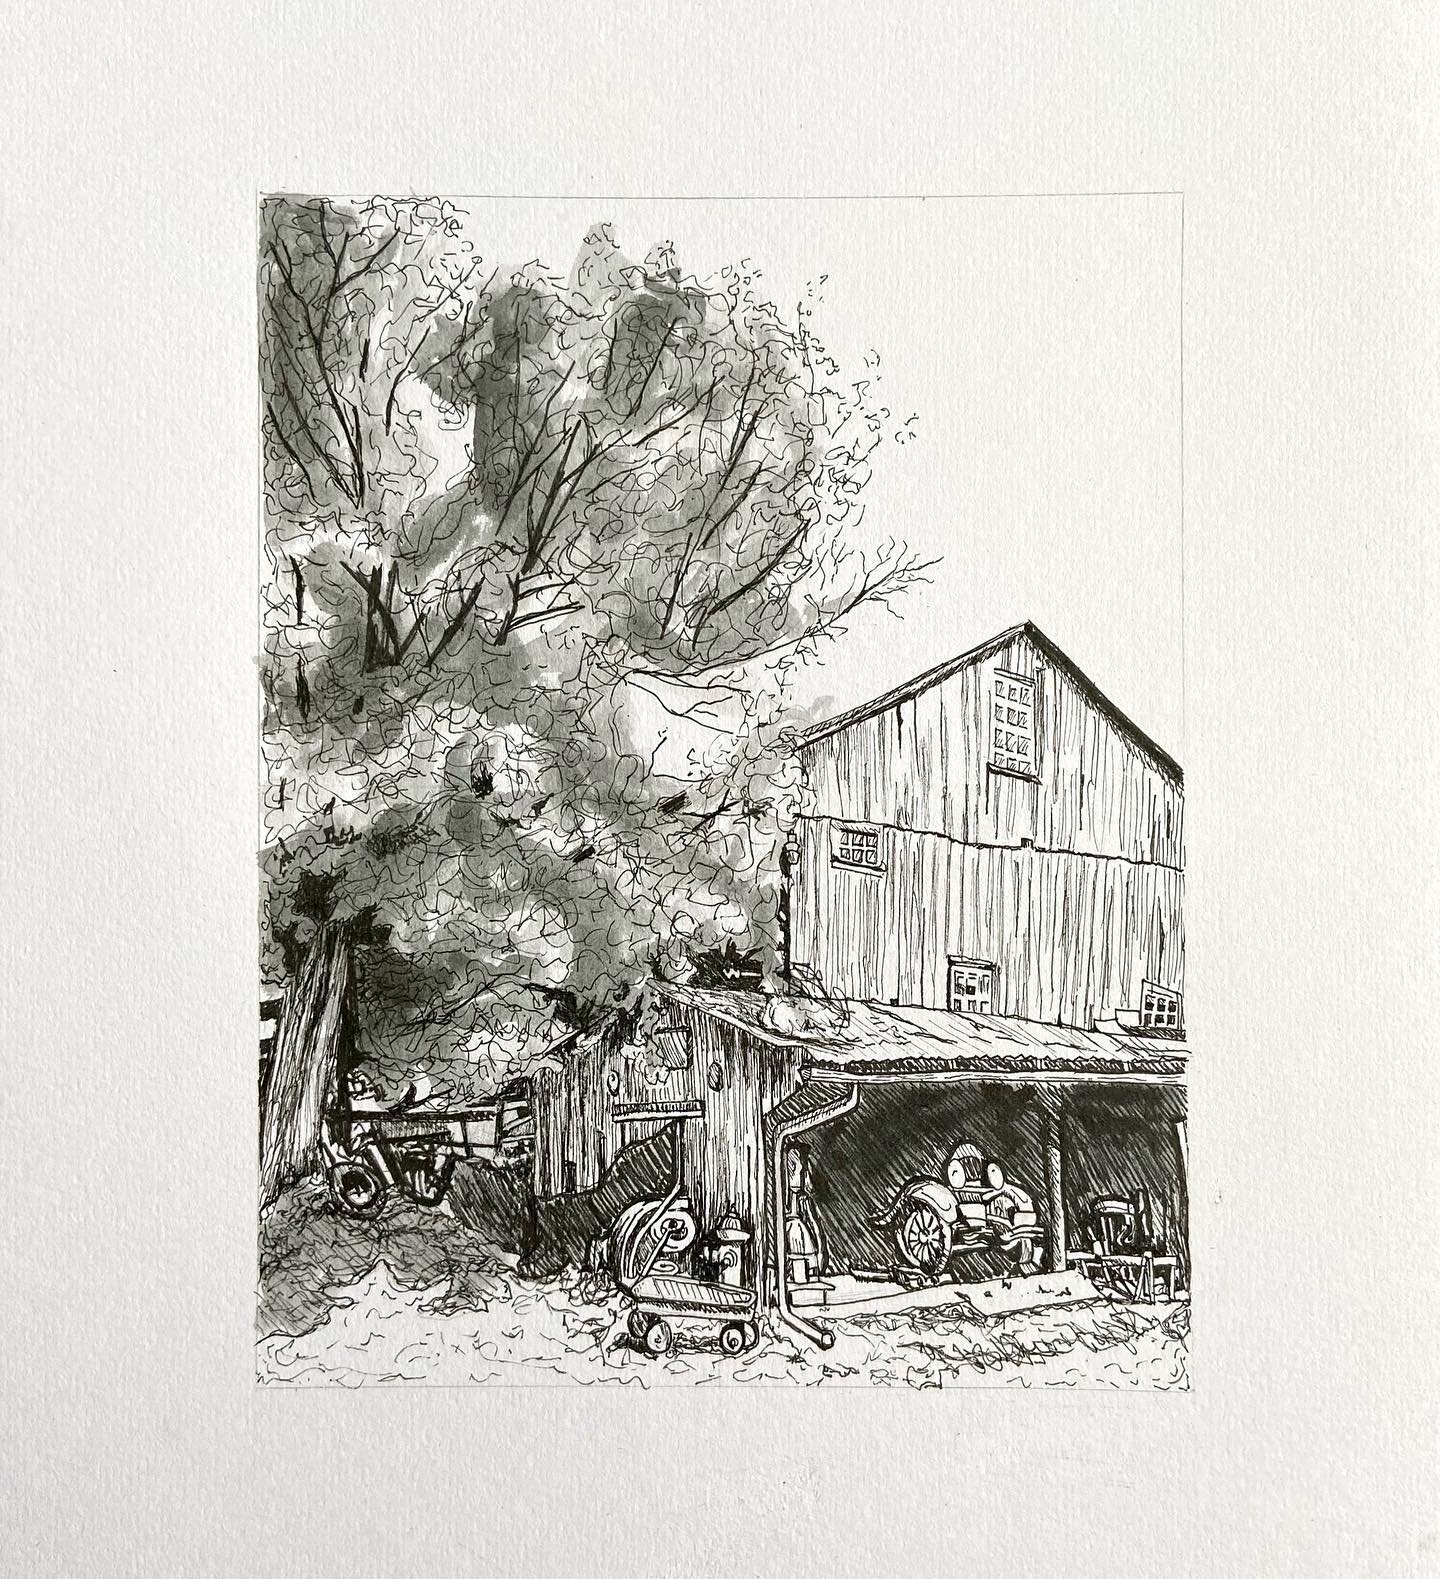 A drawing that I did for my best bud @lkman27 ! I&rsquo;m loving having the opportunity to mix a water based medium and pen in one drawing!
.
.
.
.
.
.
.
.
.
.
.
.
.
.
#penandink #penandinkdrawing #barndrawing #rusticdrawing #drawing #drawingonpaper 